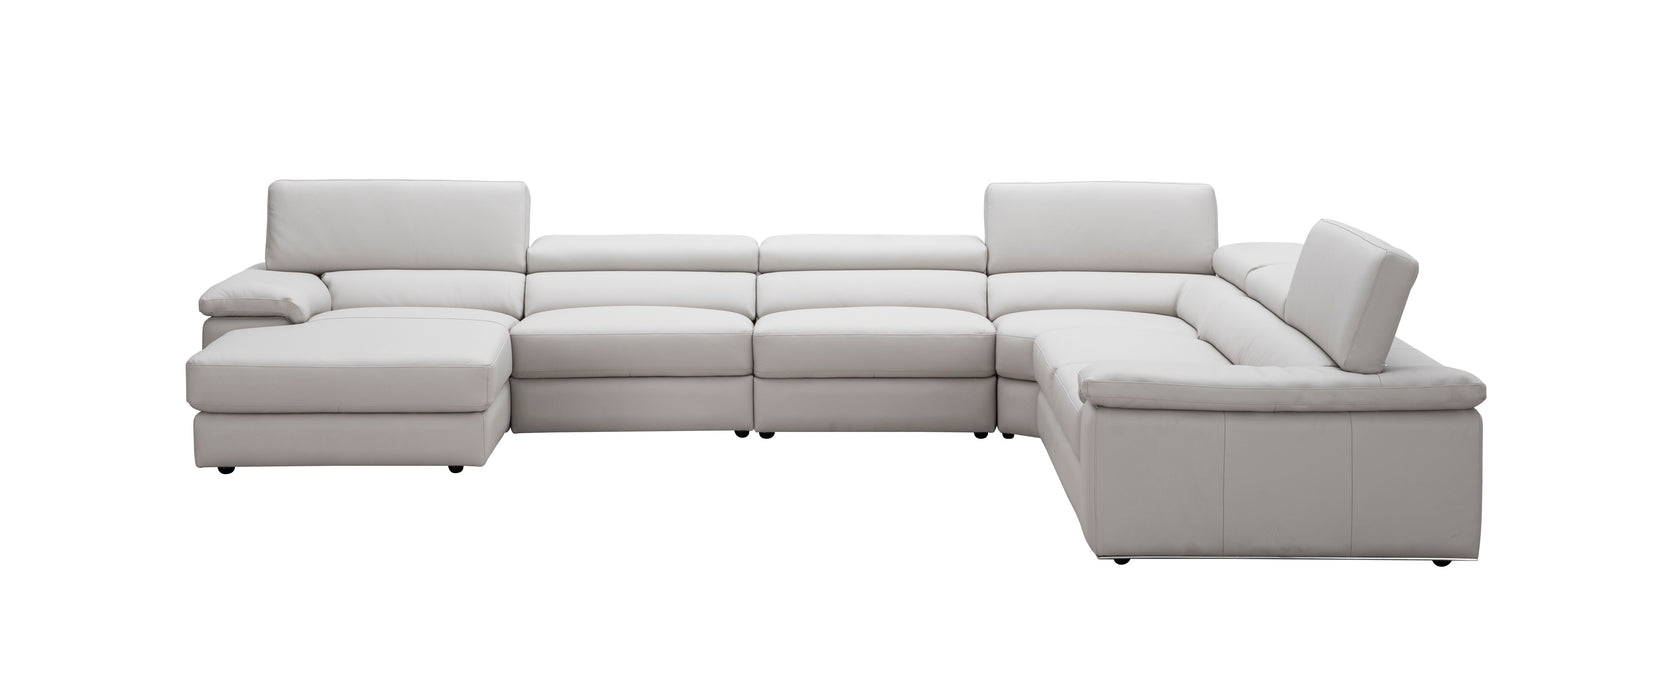 Kobe Leather Sectional 